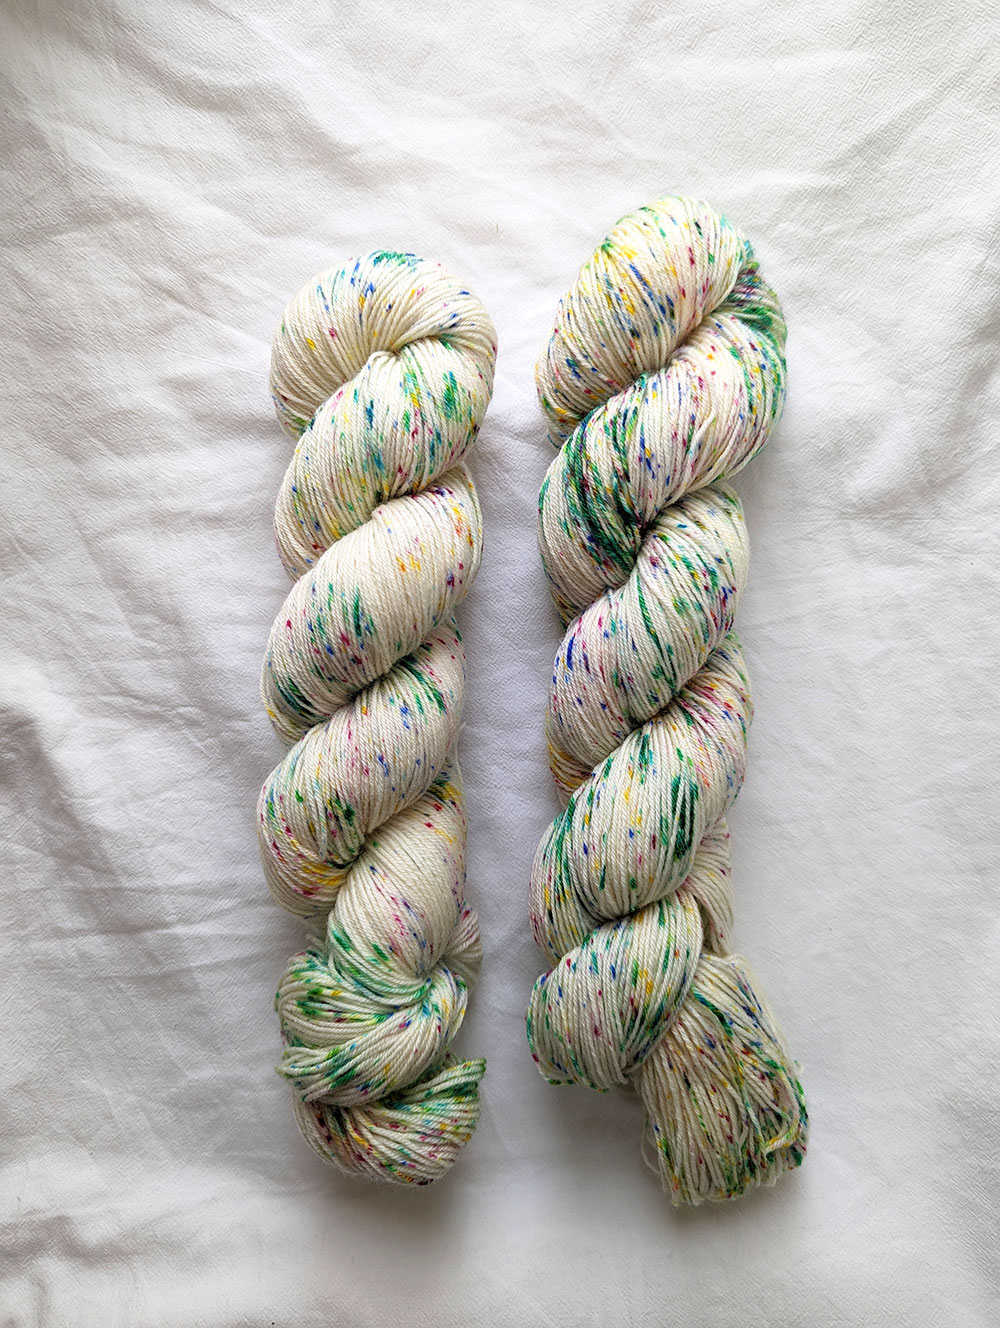 4ply - Olive Green Speckled Hand Dyed Yarn - The Old Horizon